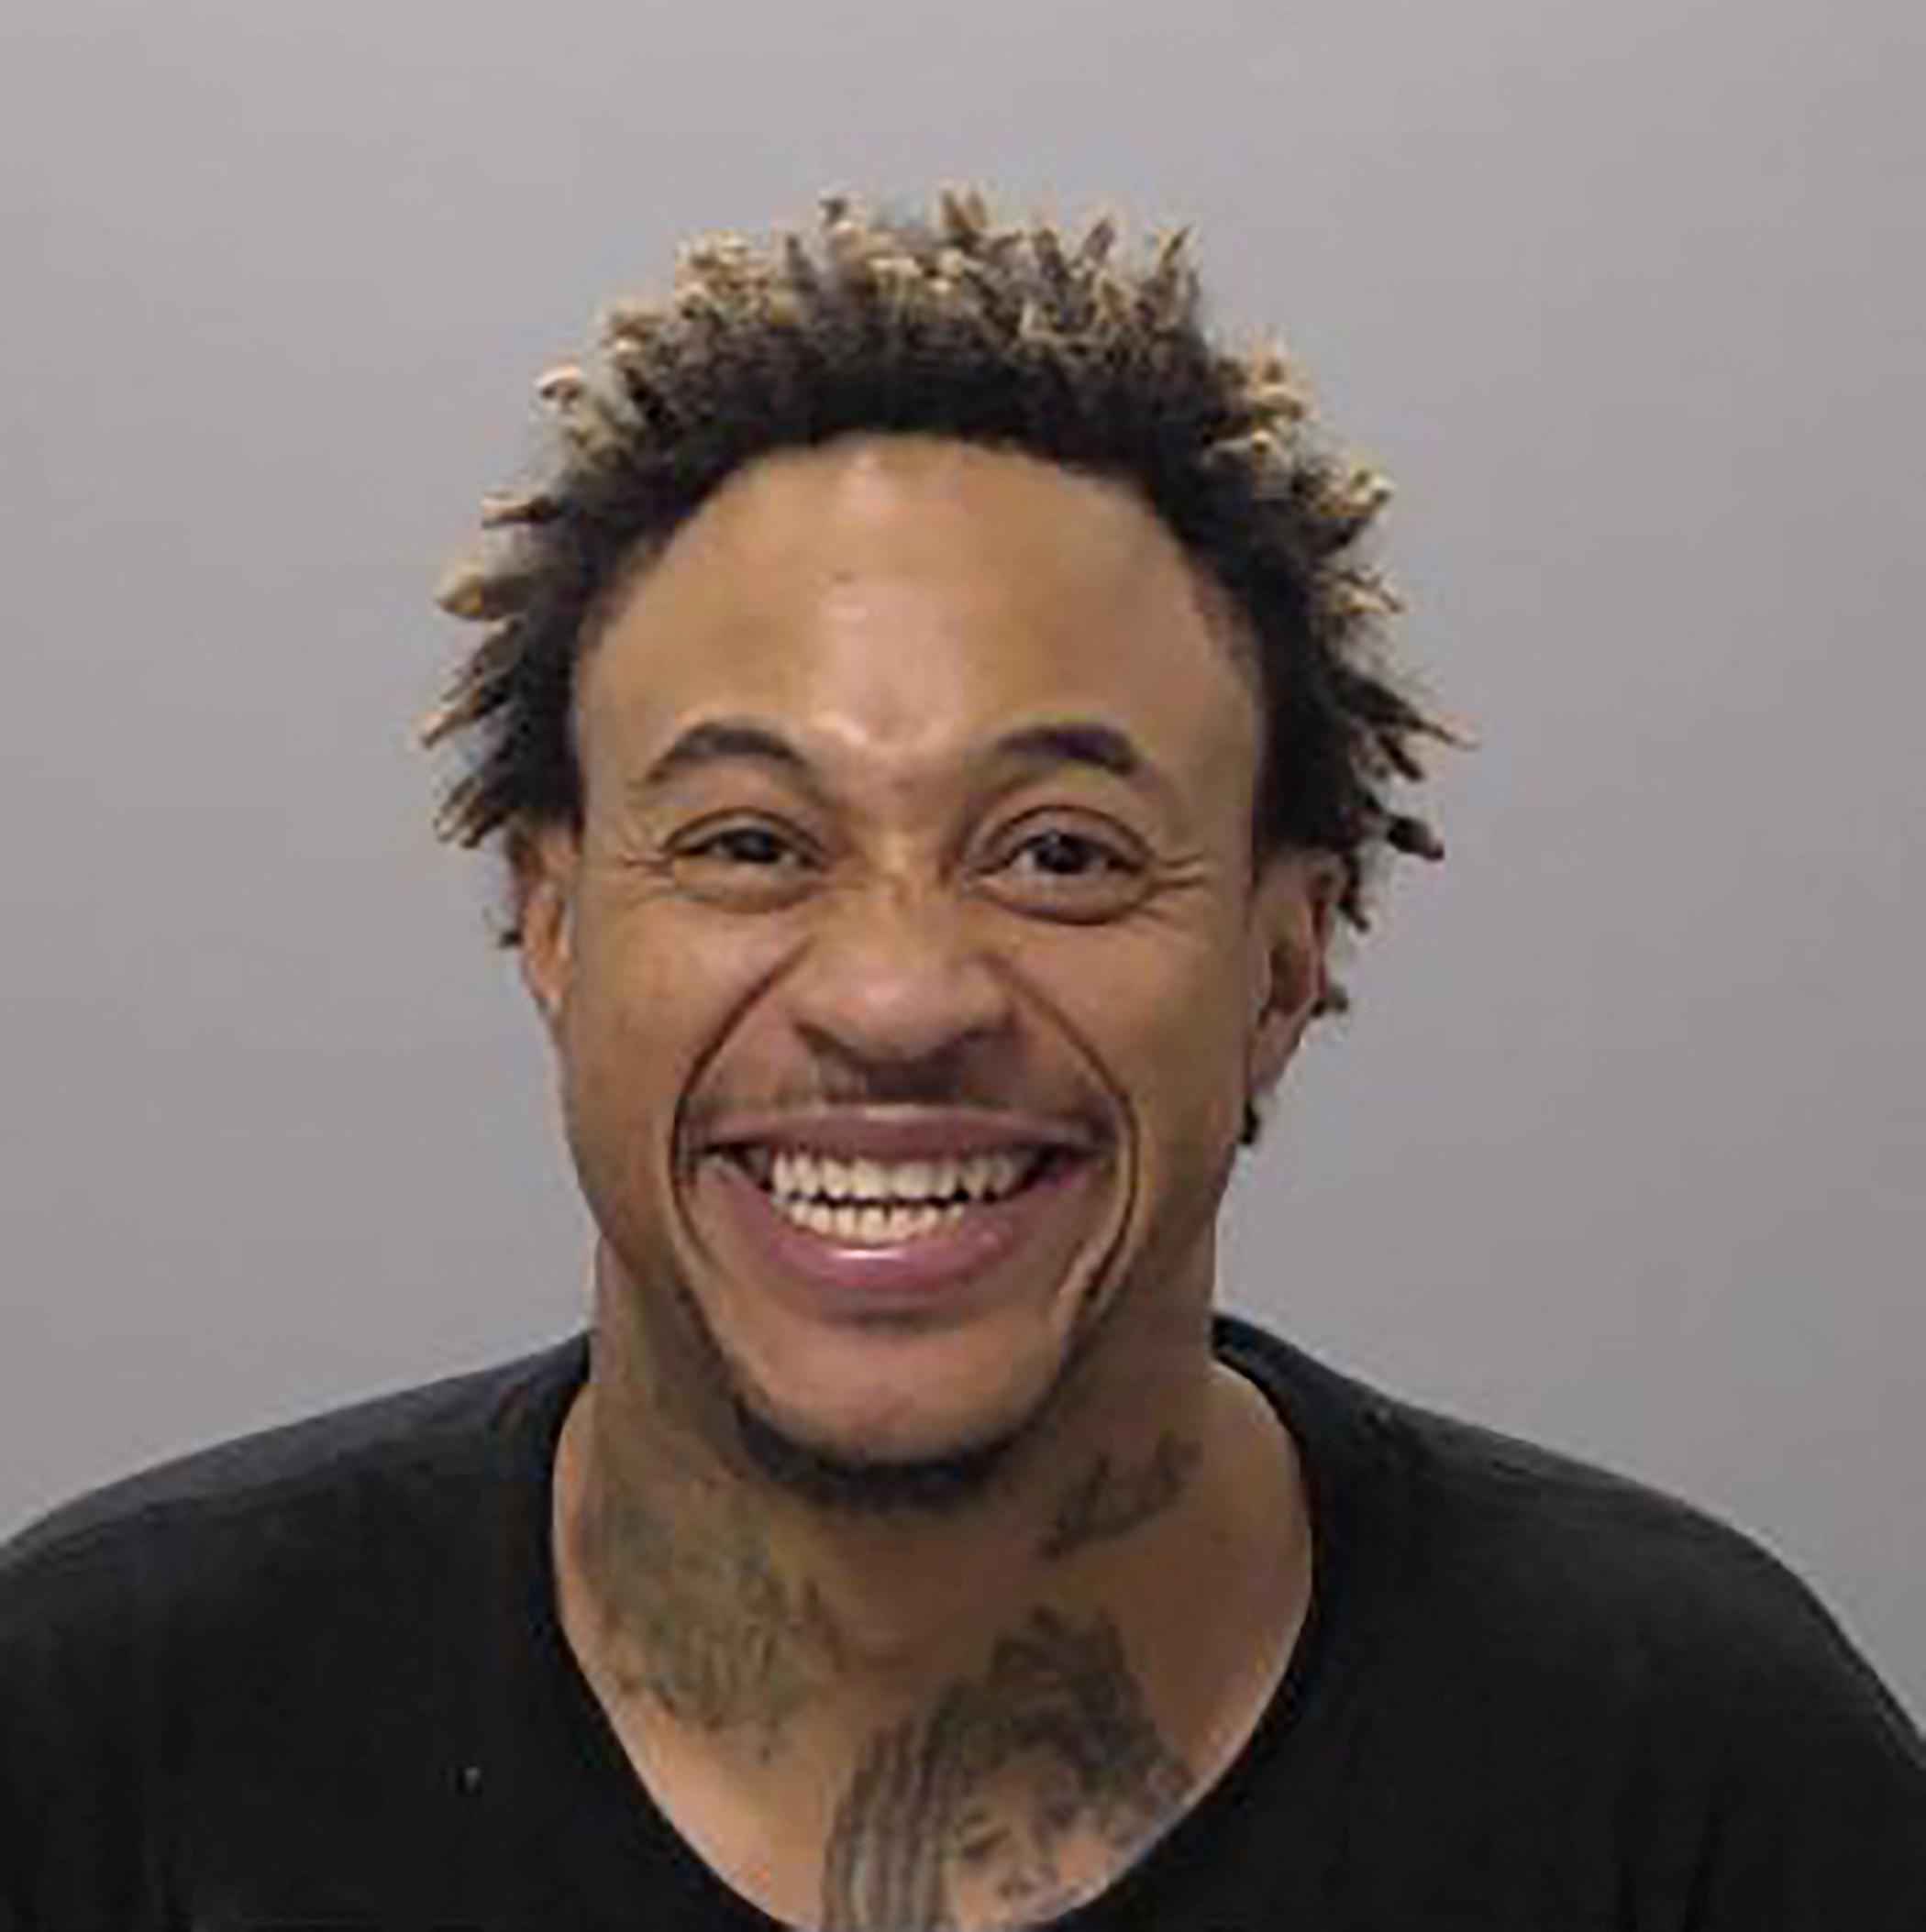 Thats So Raven star Orlando Brown grins after being arrested on domestic violence charge.